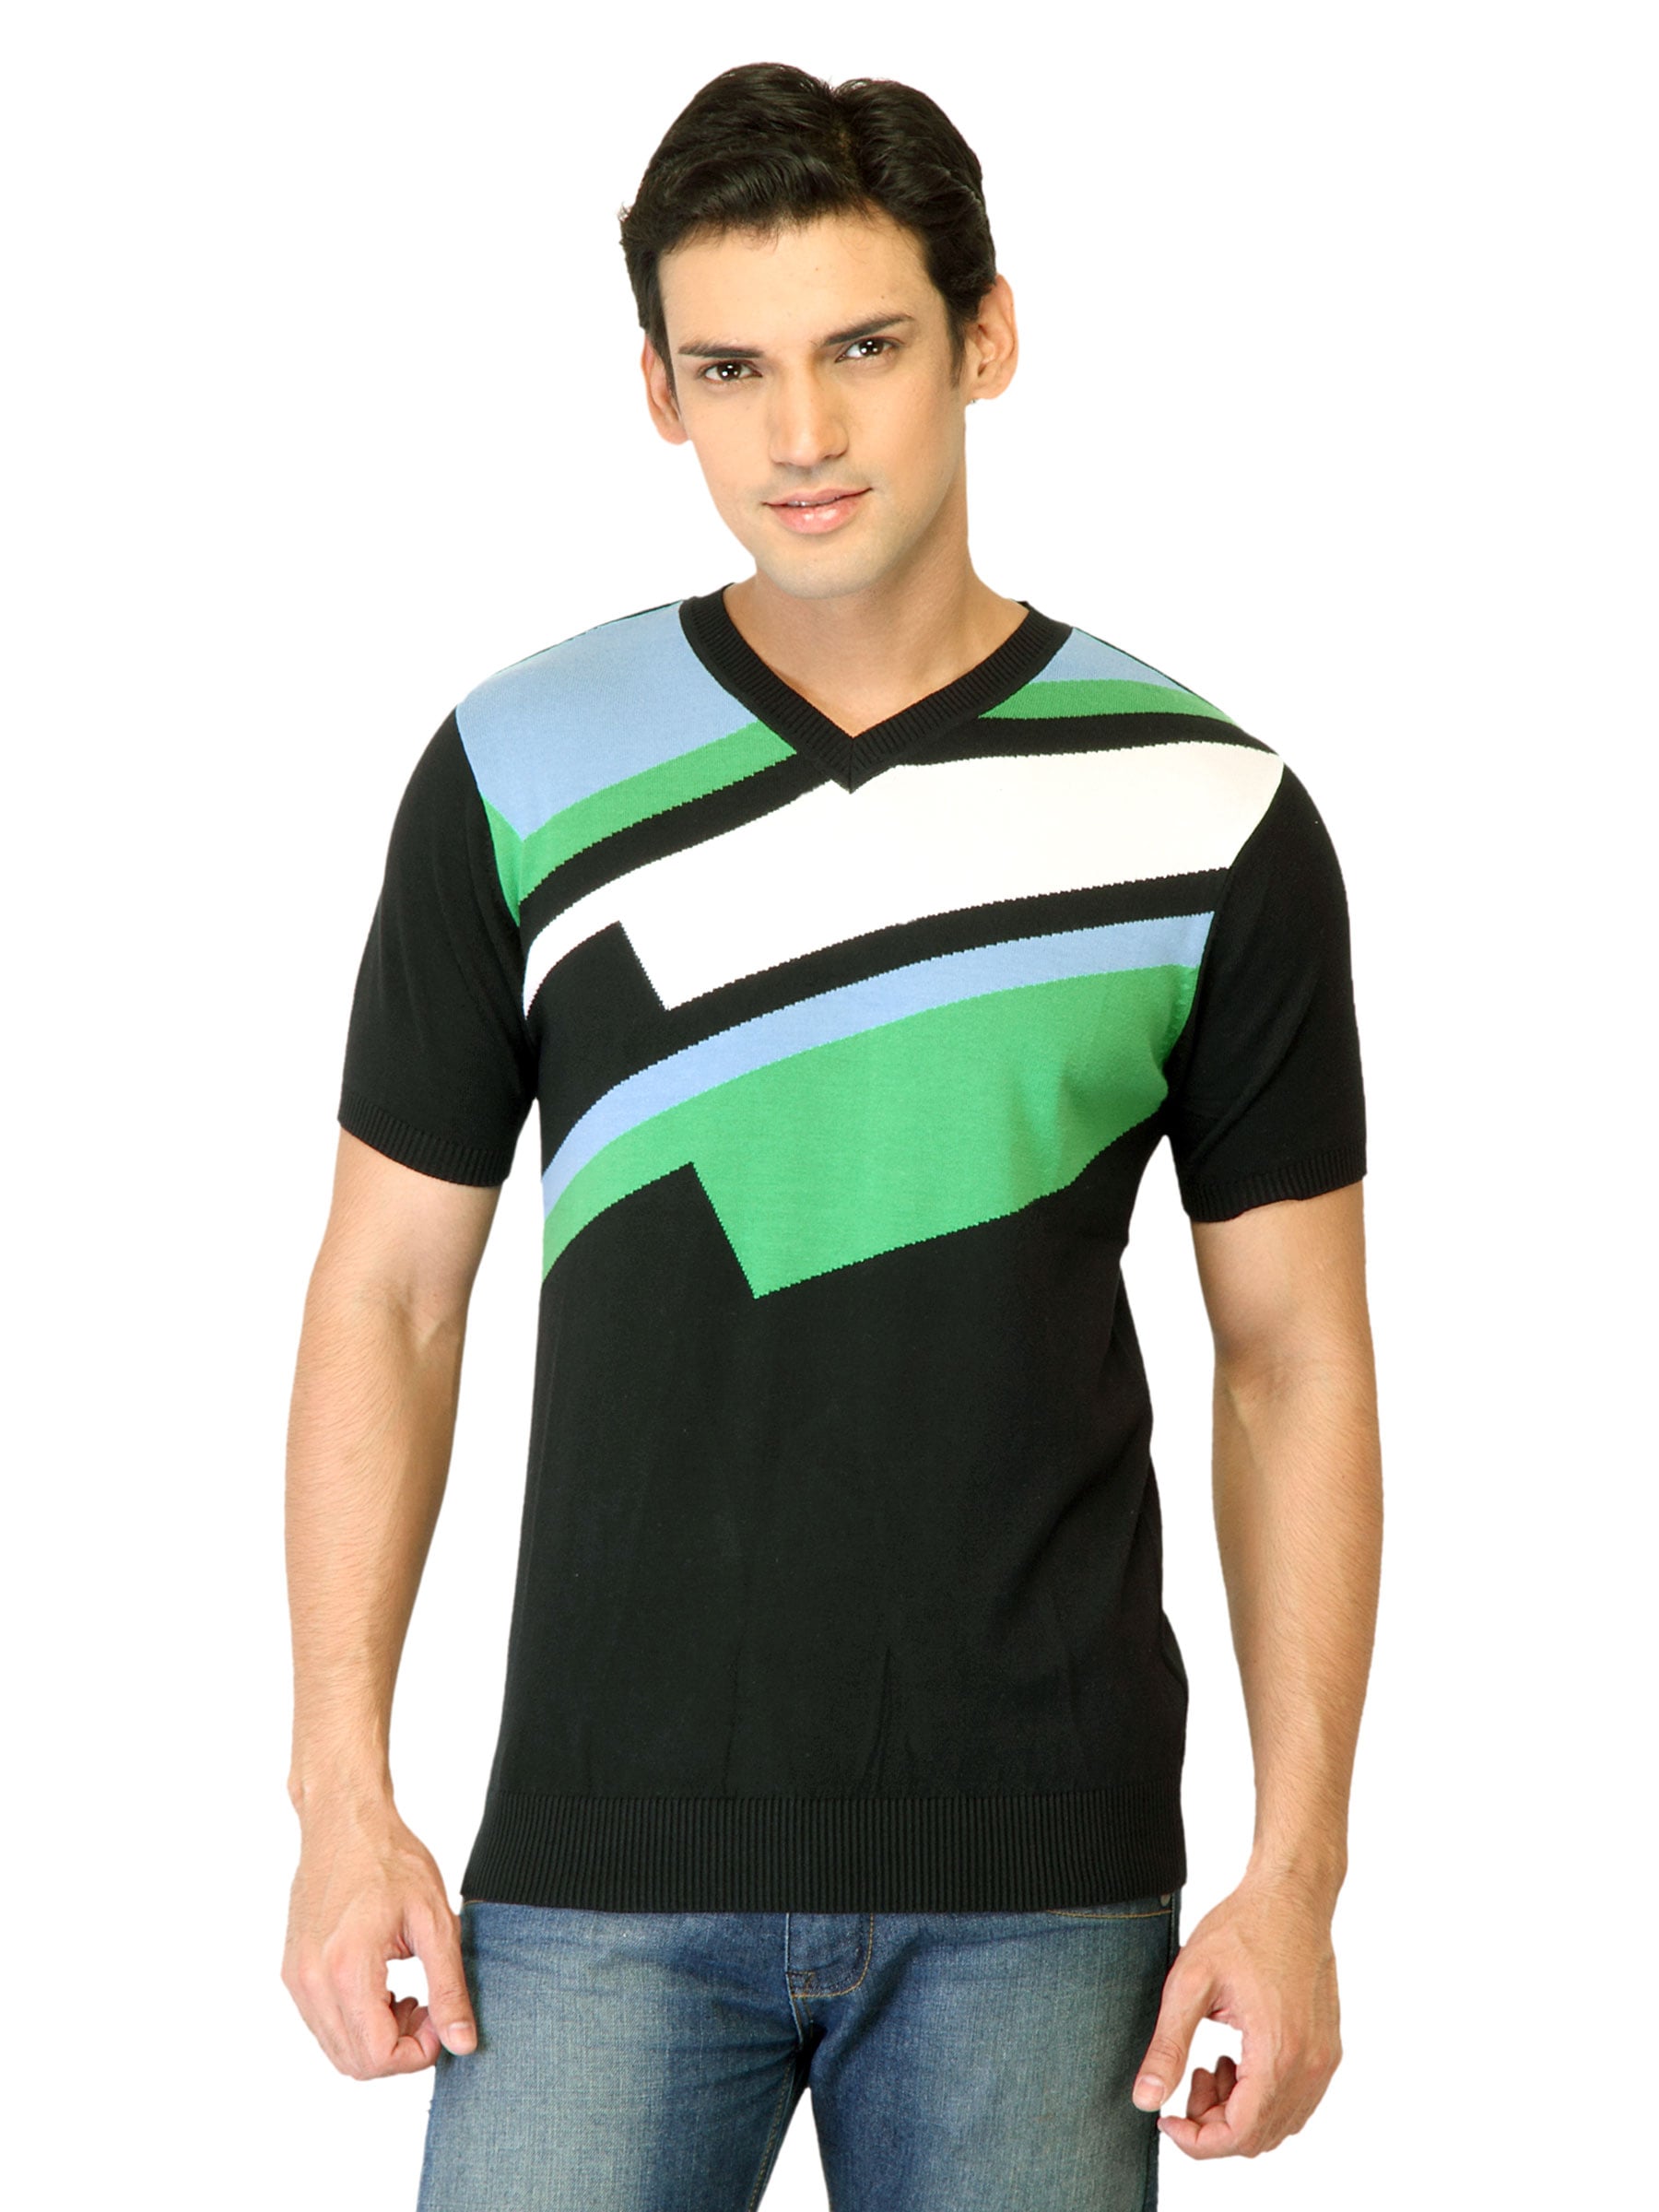 United Colors of Benetton Men Stripes Green Tshirts